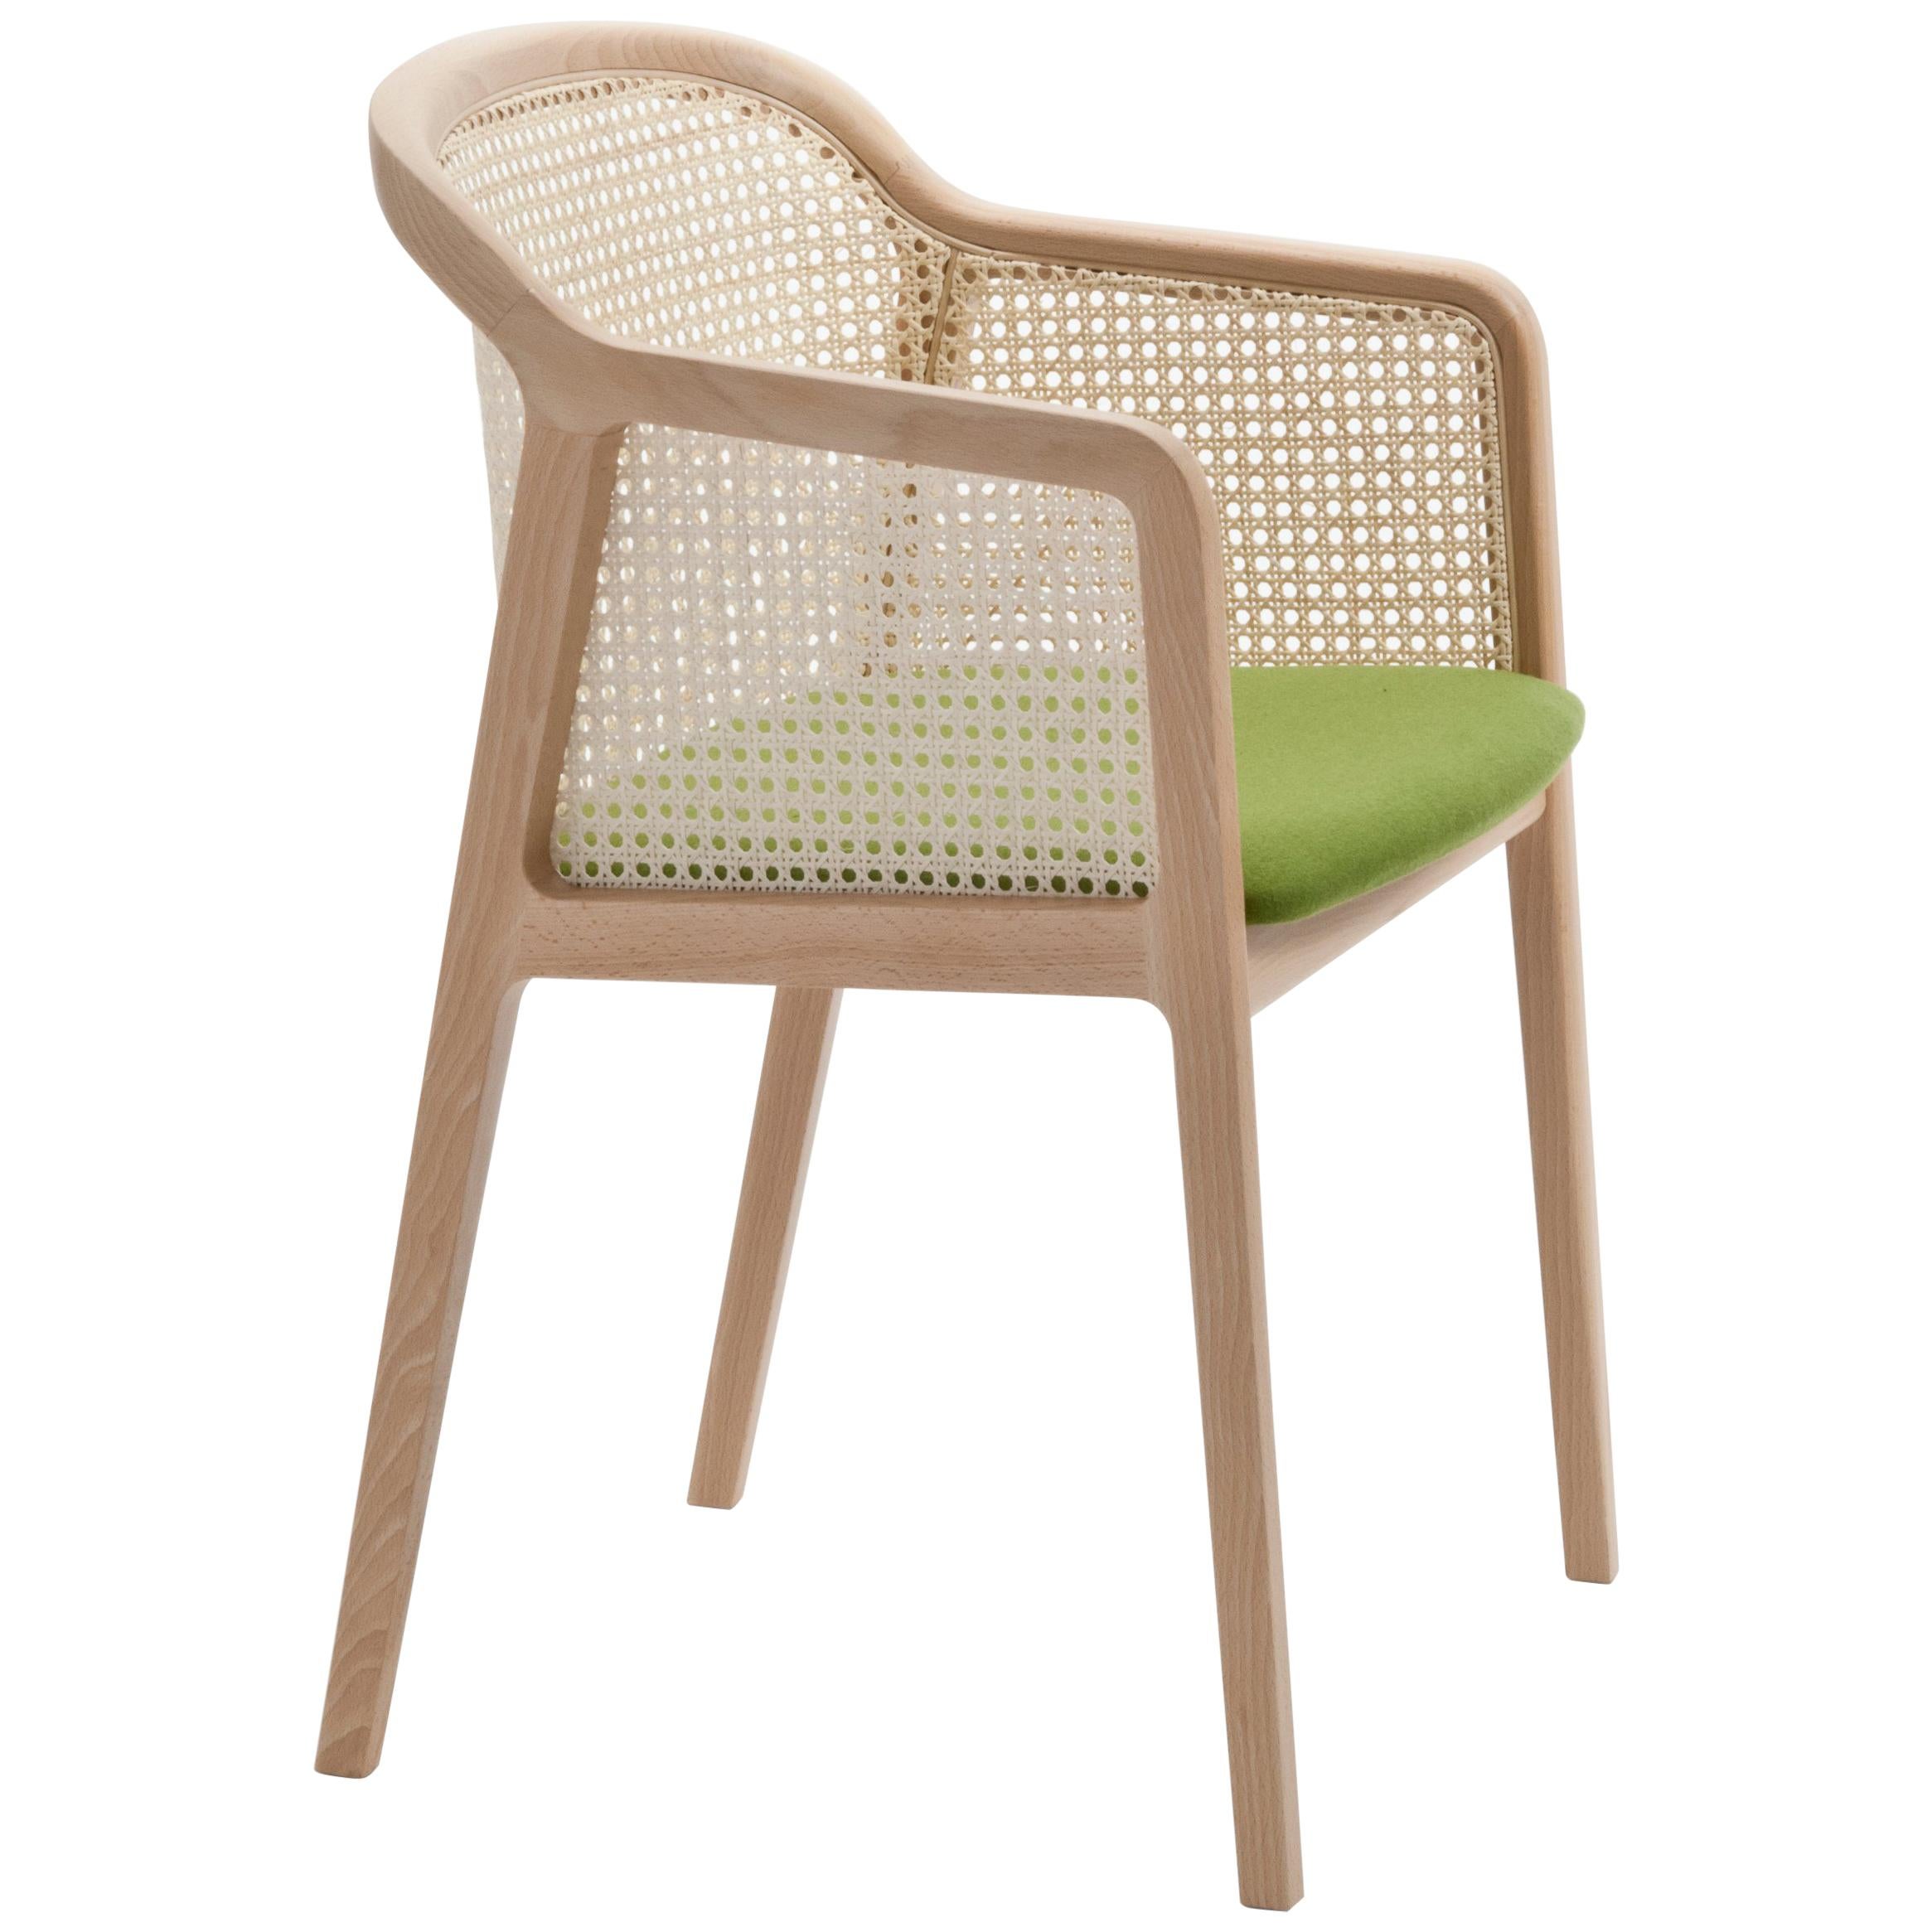 Vienna Armchair by Colé, Modernity Design in Wood and Straw, Green Upholstered Seat